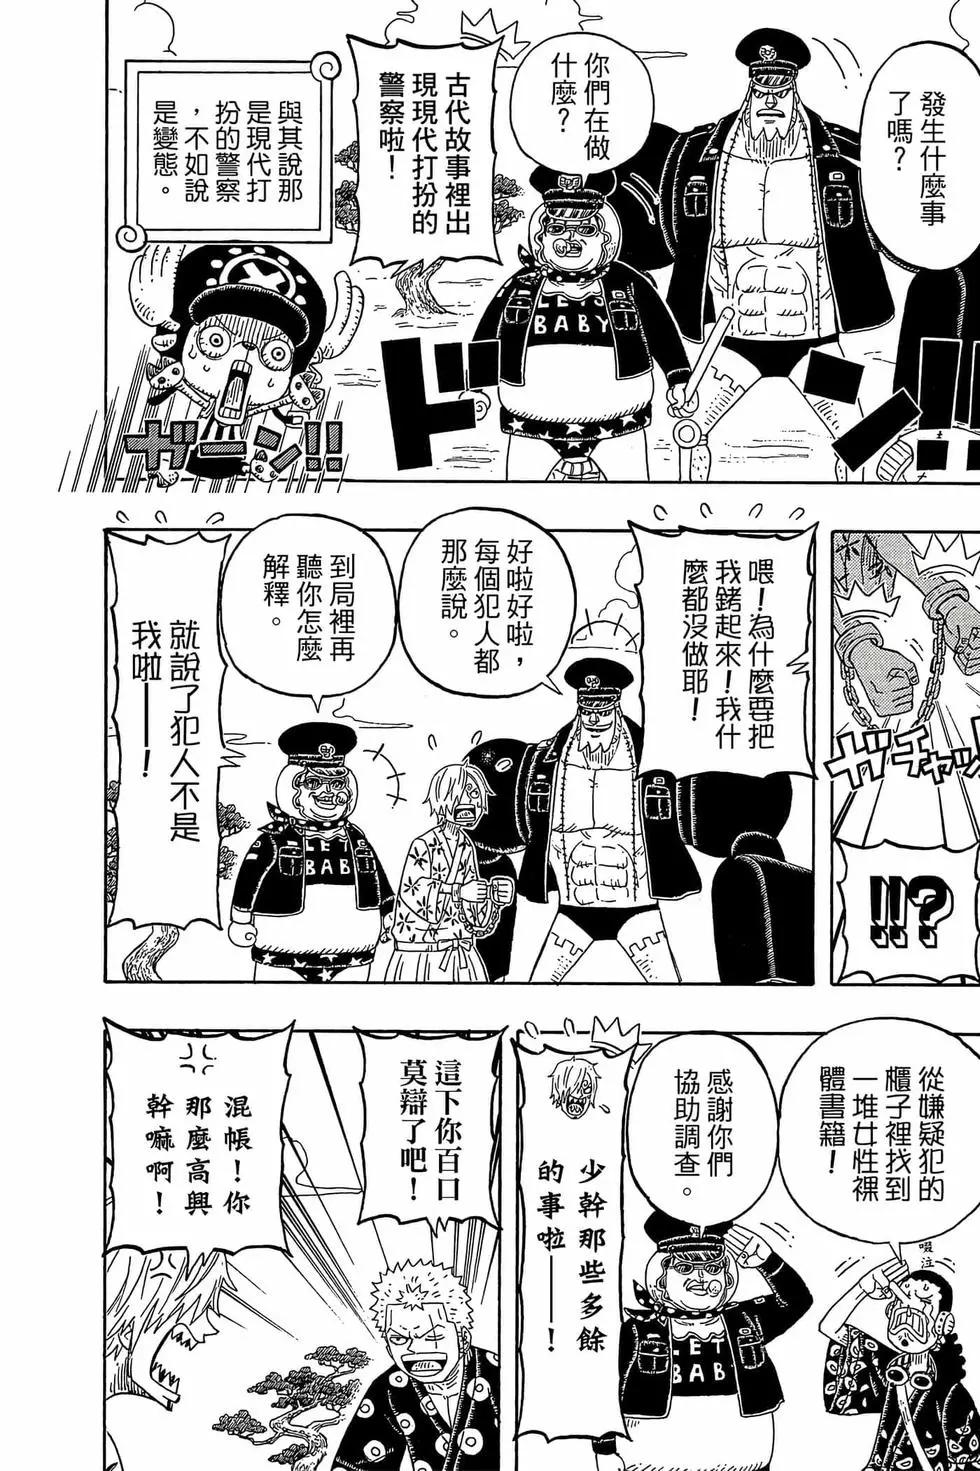 One piece party - 第03卷(2/4) - 3